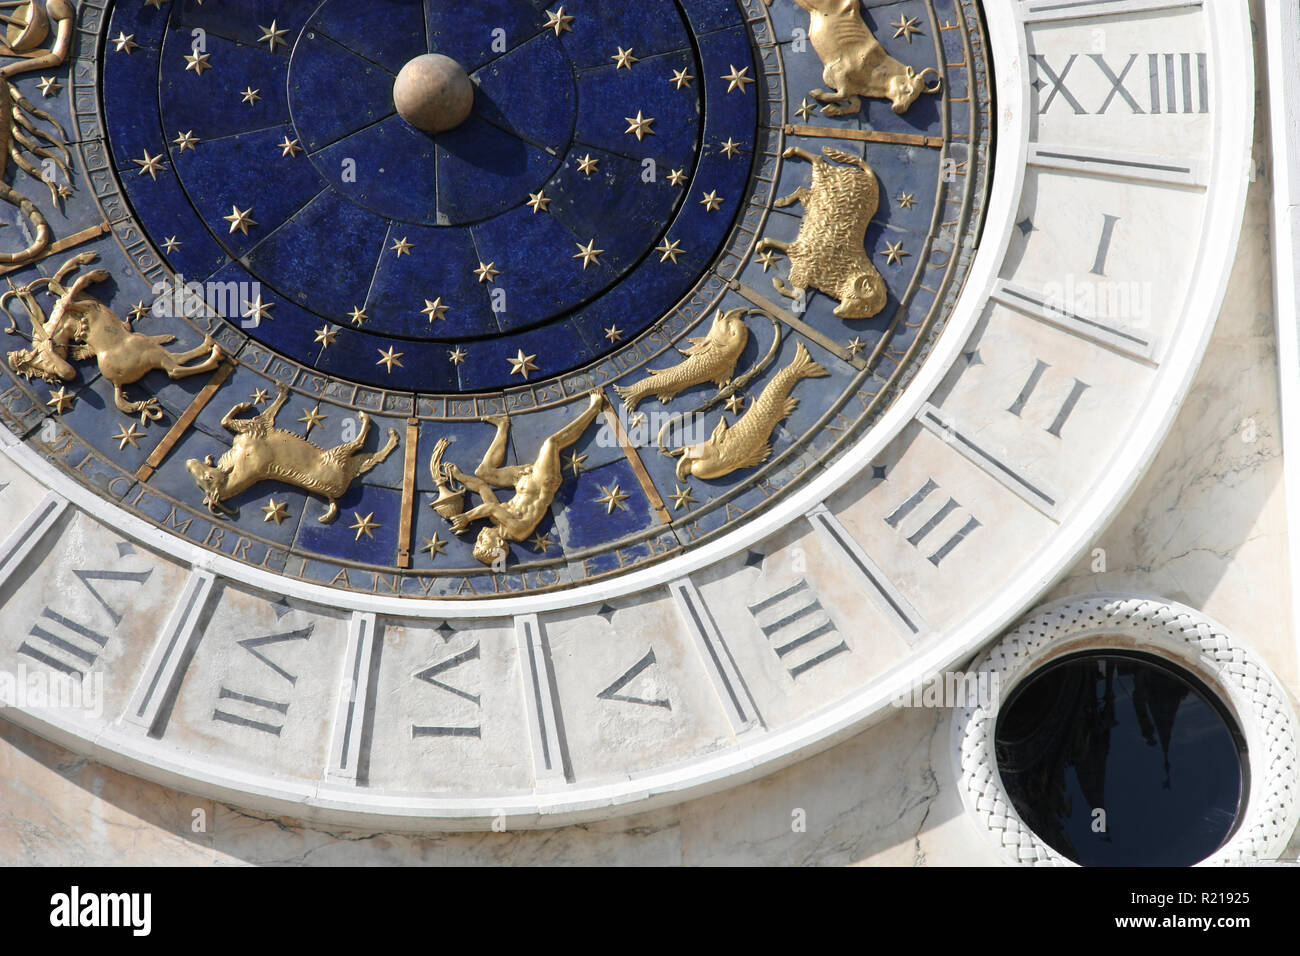 Old astronomic clock detail in Venice, Italy. UNESCO World Heritage Site. Stock Photo